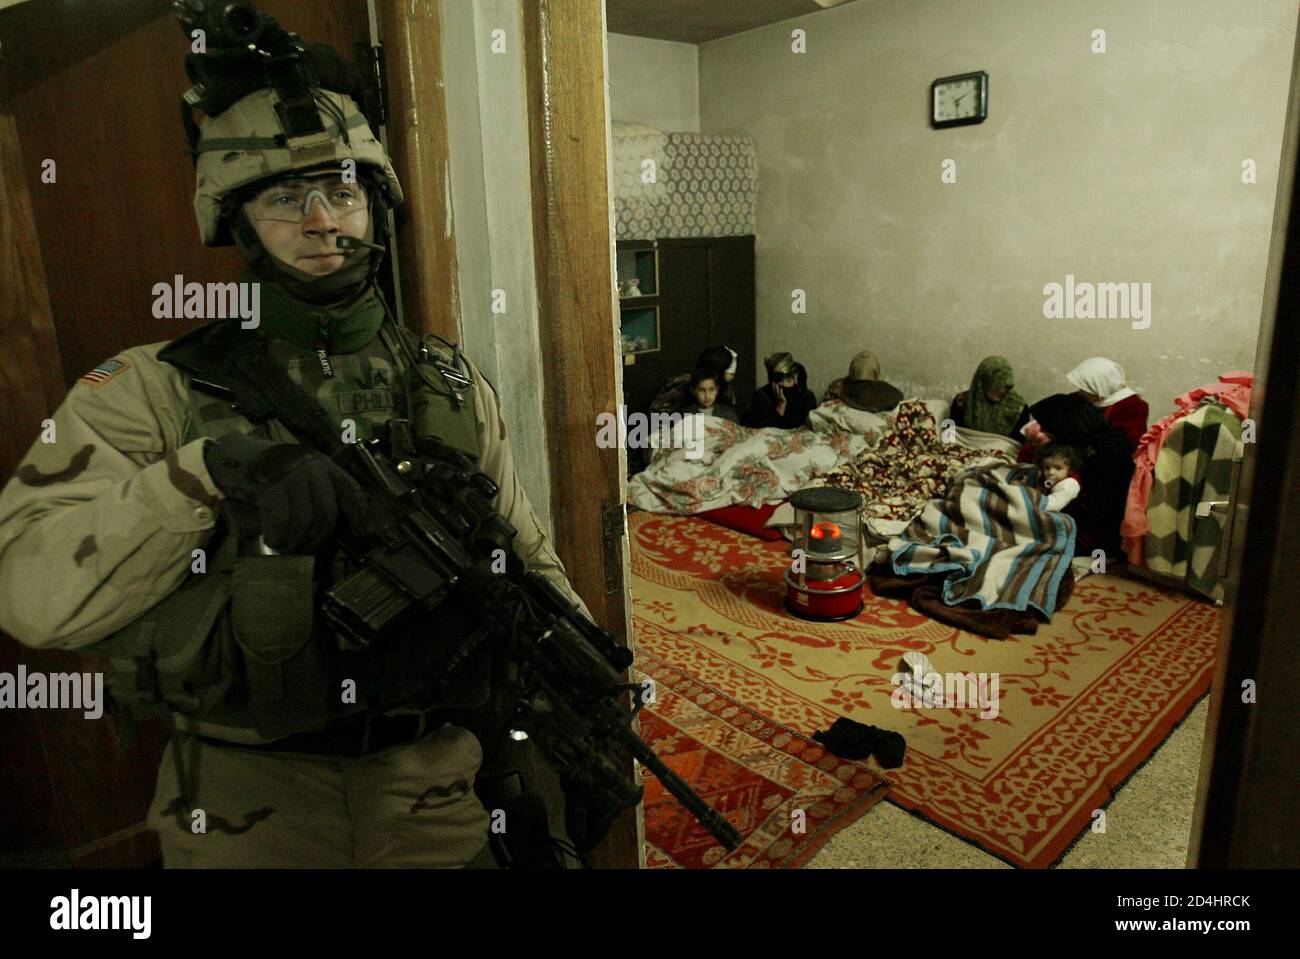 U.S. soldiers from Charlie company of the 3rd Battalion, 21st Infantry searches a house looking for explosives during a raid in Mosul, northern Iraq early January 15, 2005. [A U.S. commander warned al Qaeda ally Abu Musab al-Zarqawi, a driving force behind escalating attacks in the build up to Iraq's election, that American troops were on his trail and would capture or kill him sooner or later.] Stock Photo